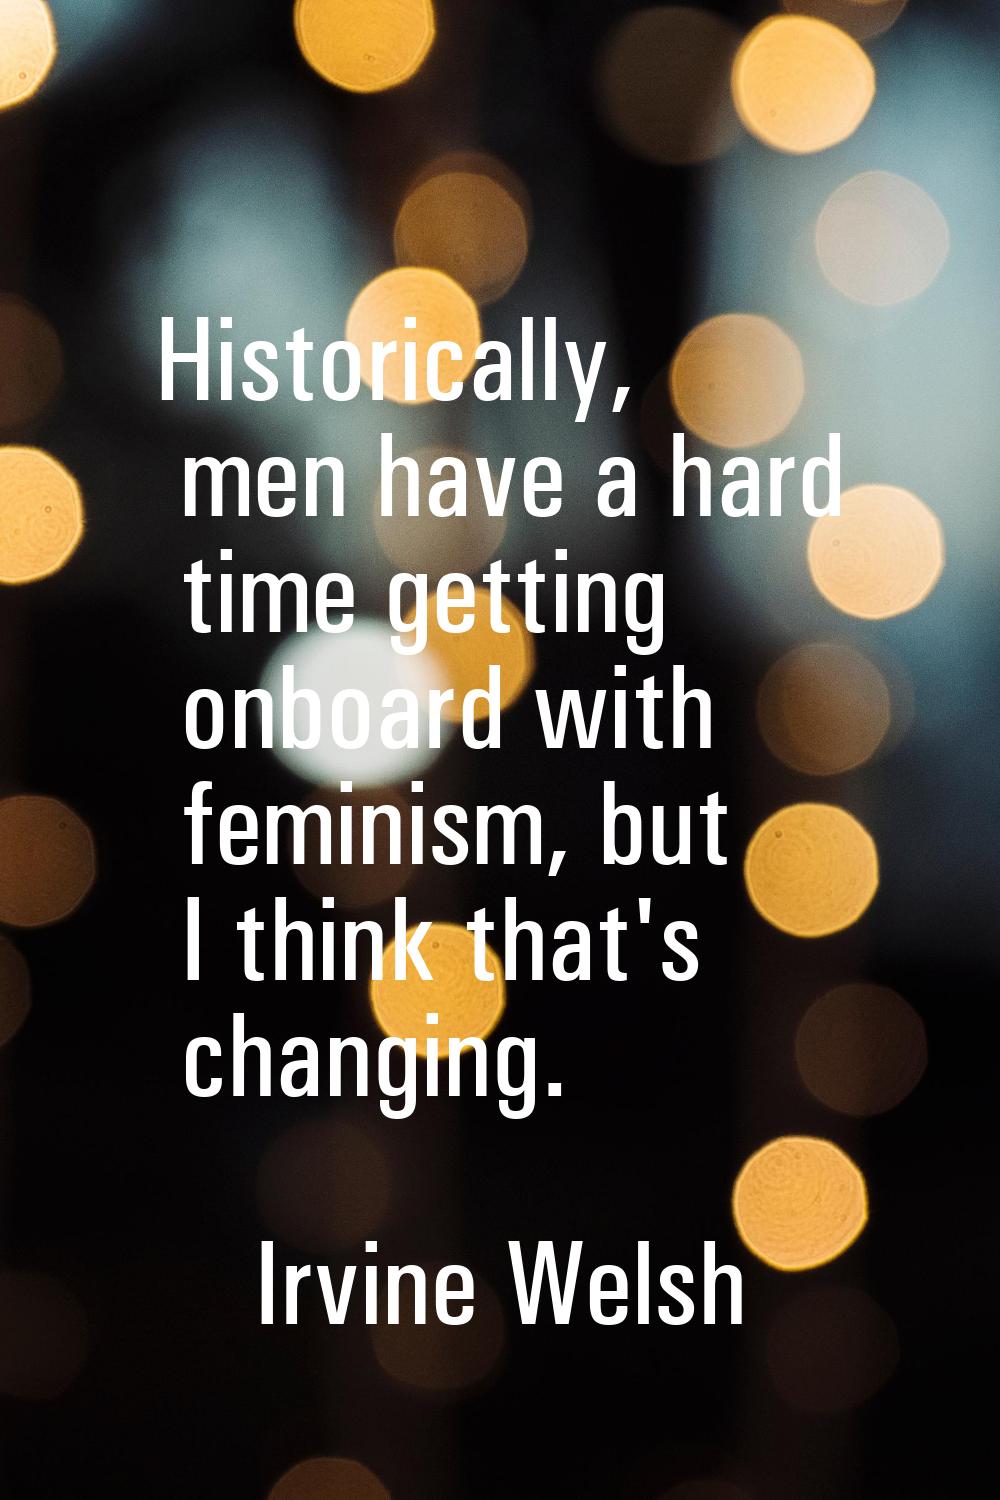 Historically, men have a hard time getting onboard with feminism, but I think that's changing.